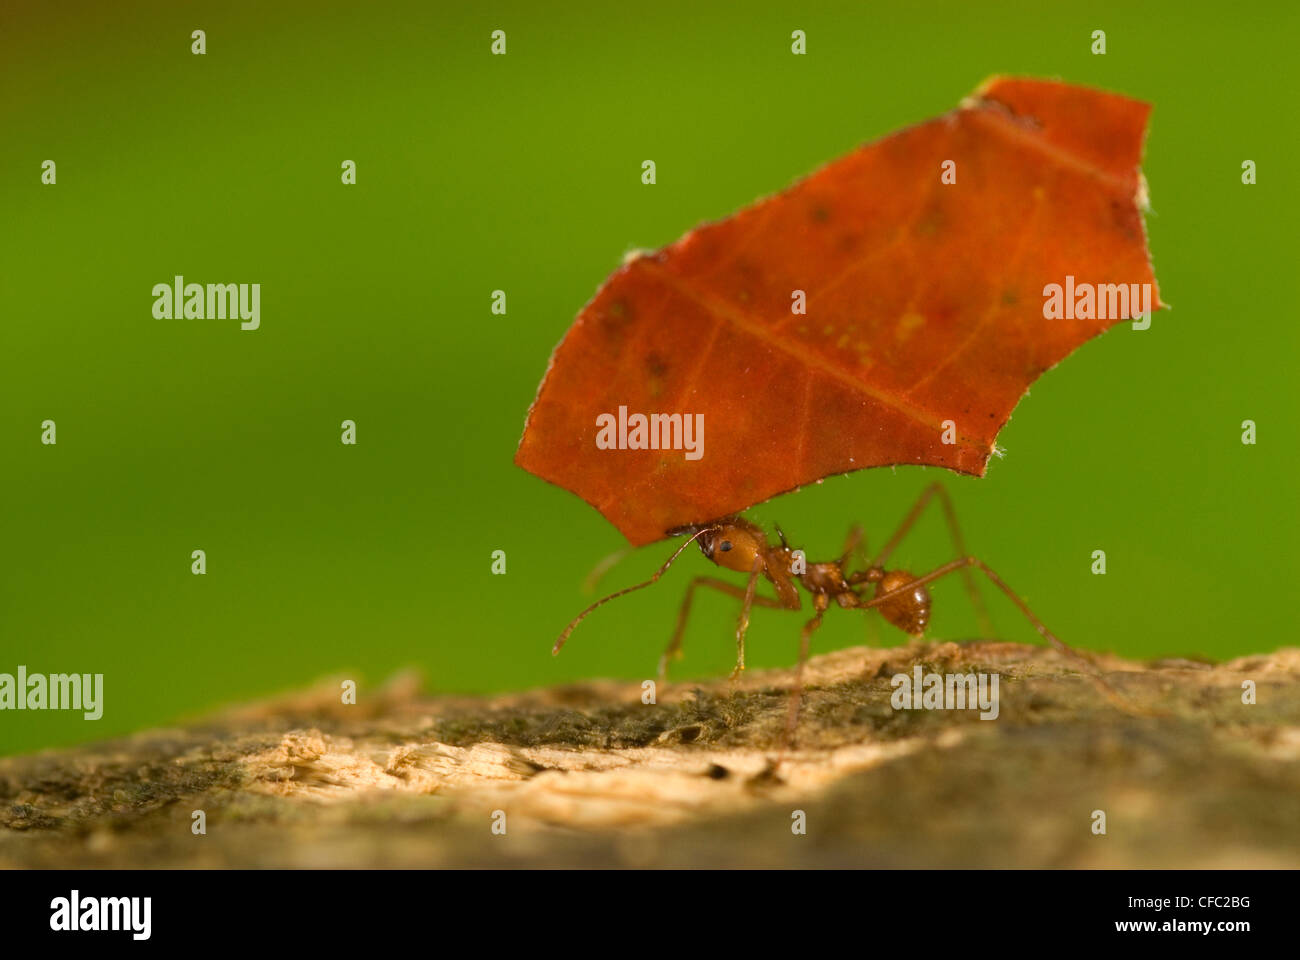 Leaf-cutter ant carries a red leaf in Corcovado, Costa Rica Stock Photo